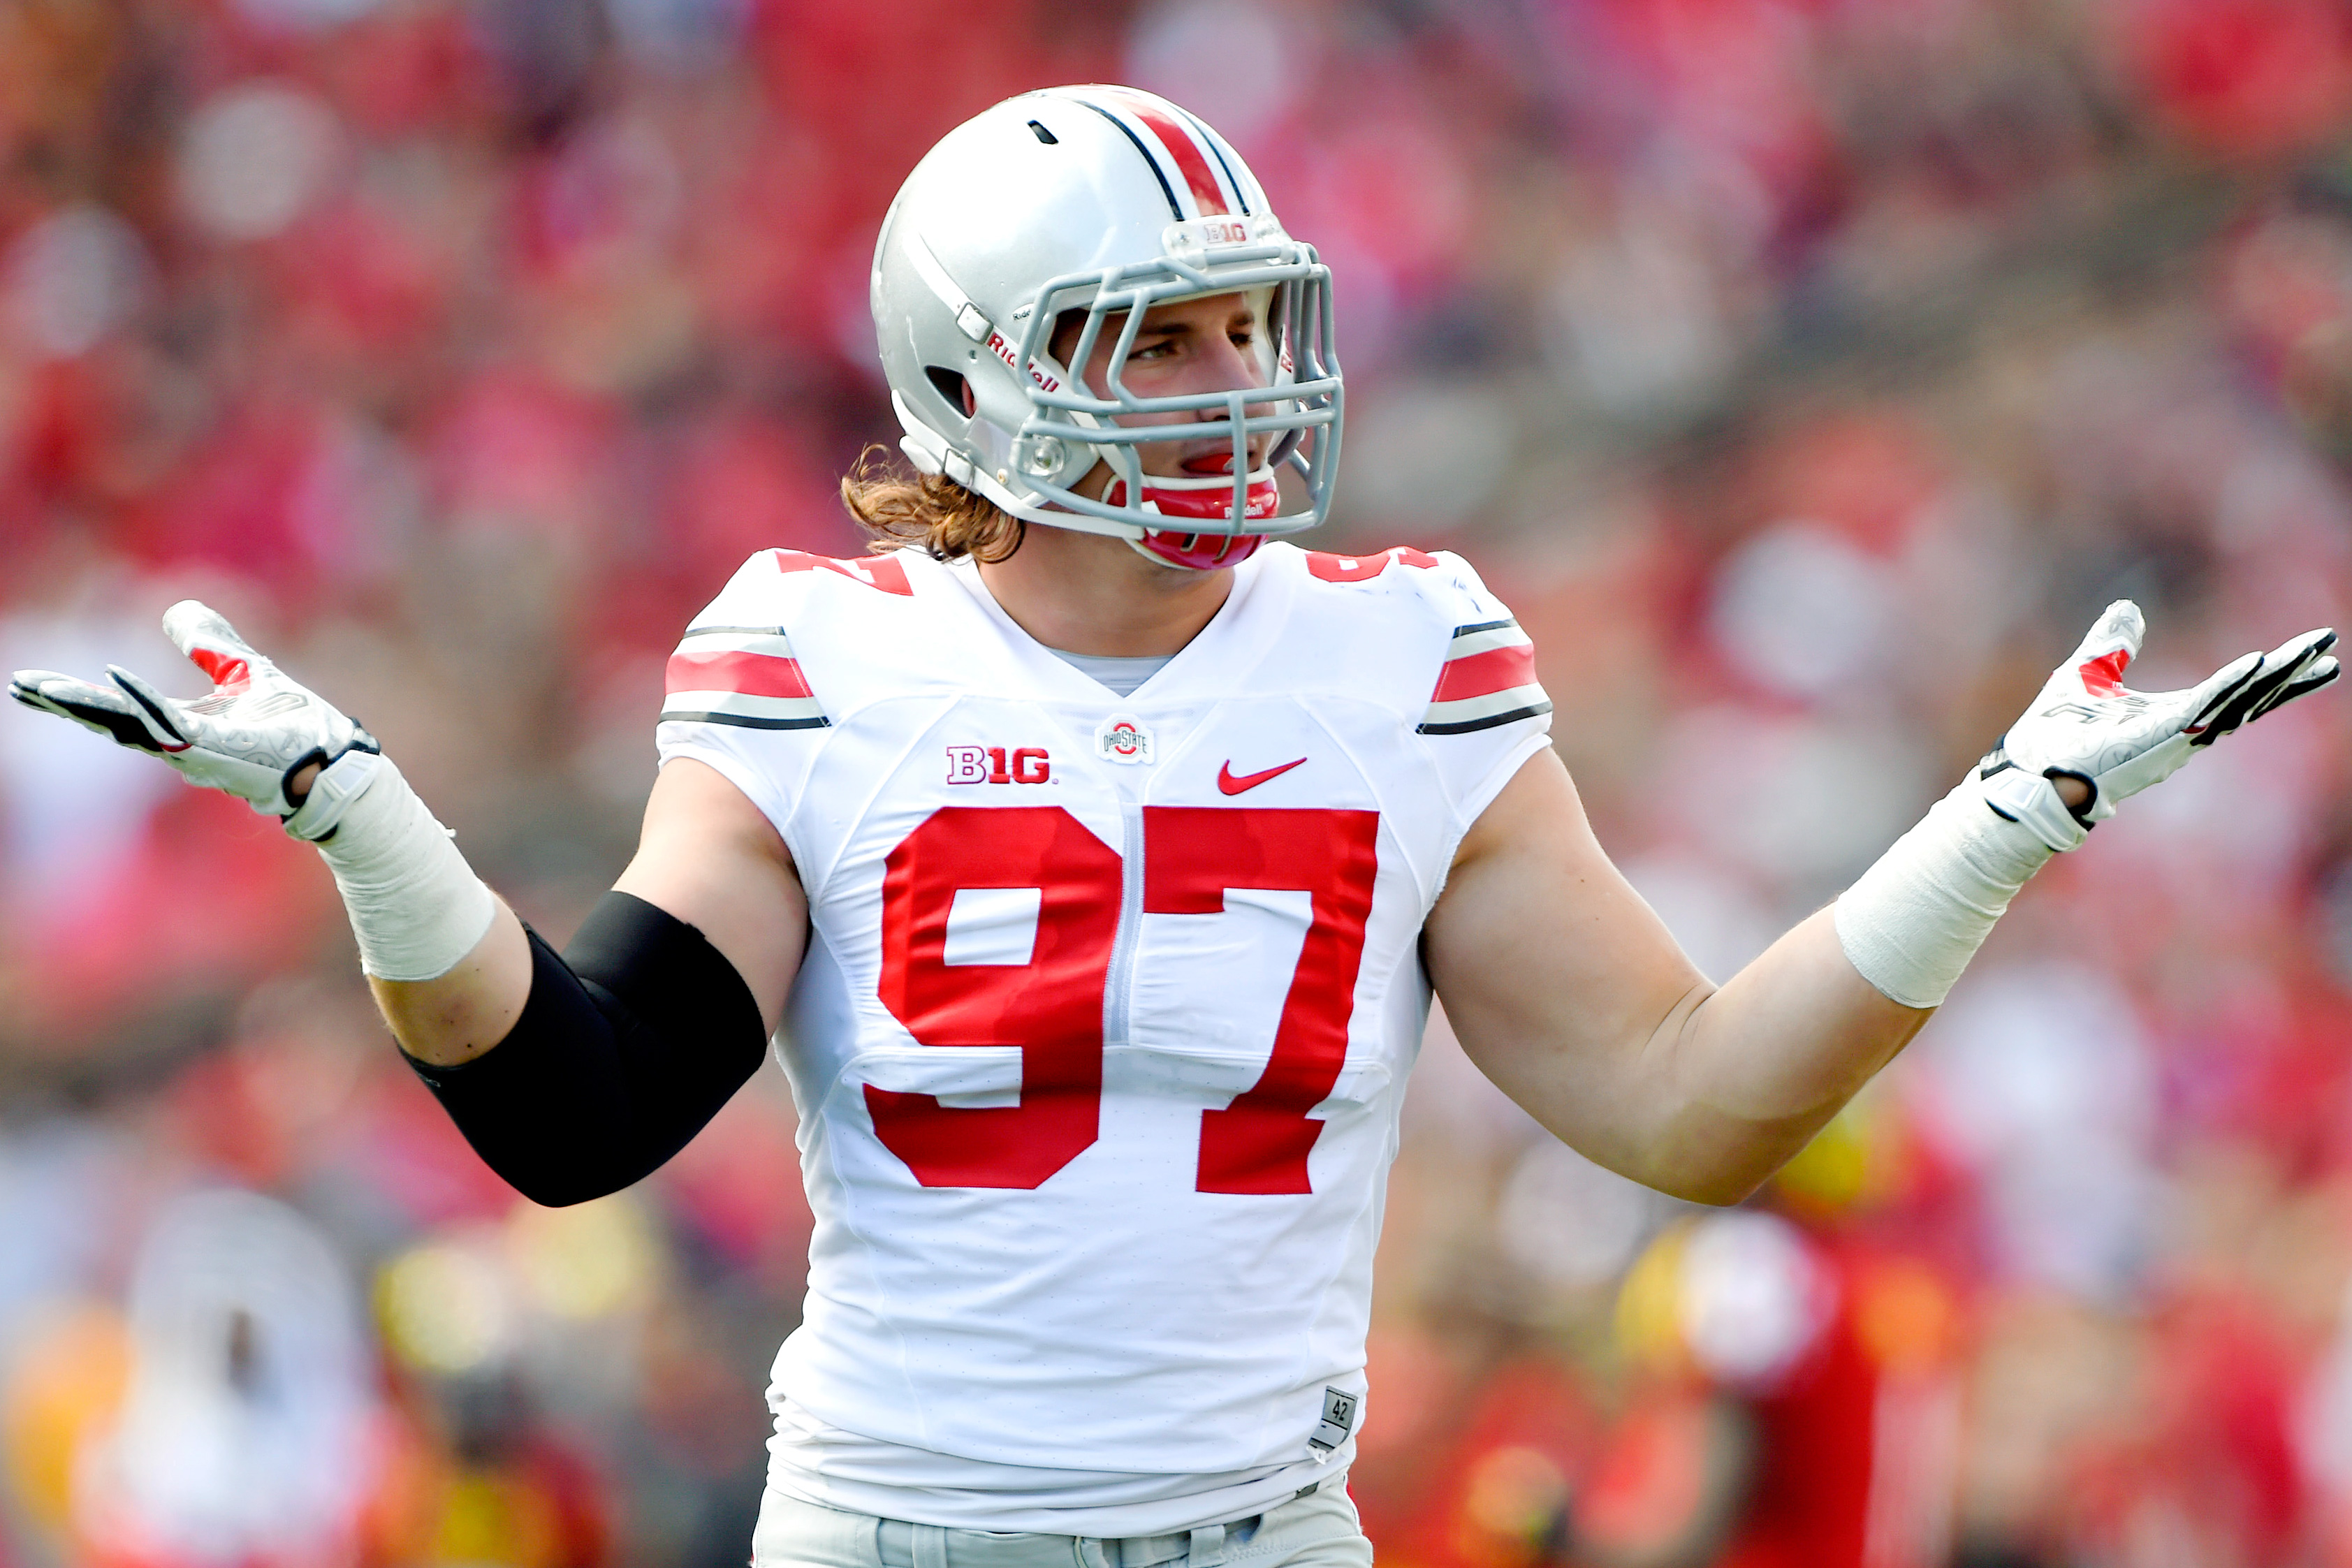 Joey Bosa has the highest composite rating (.981) of the positions and active players covered so far.